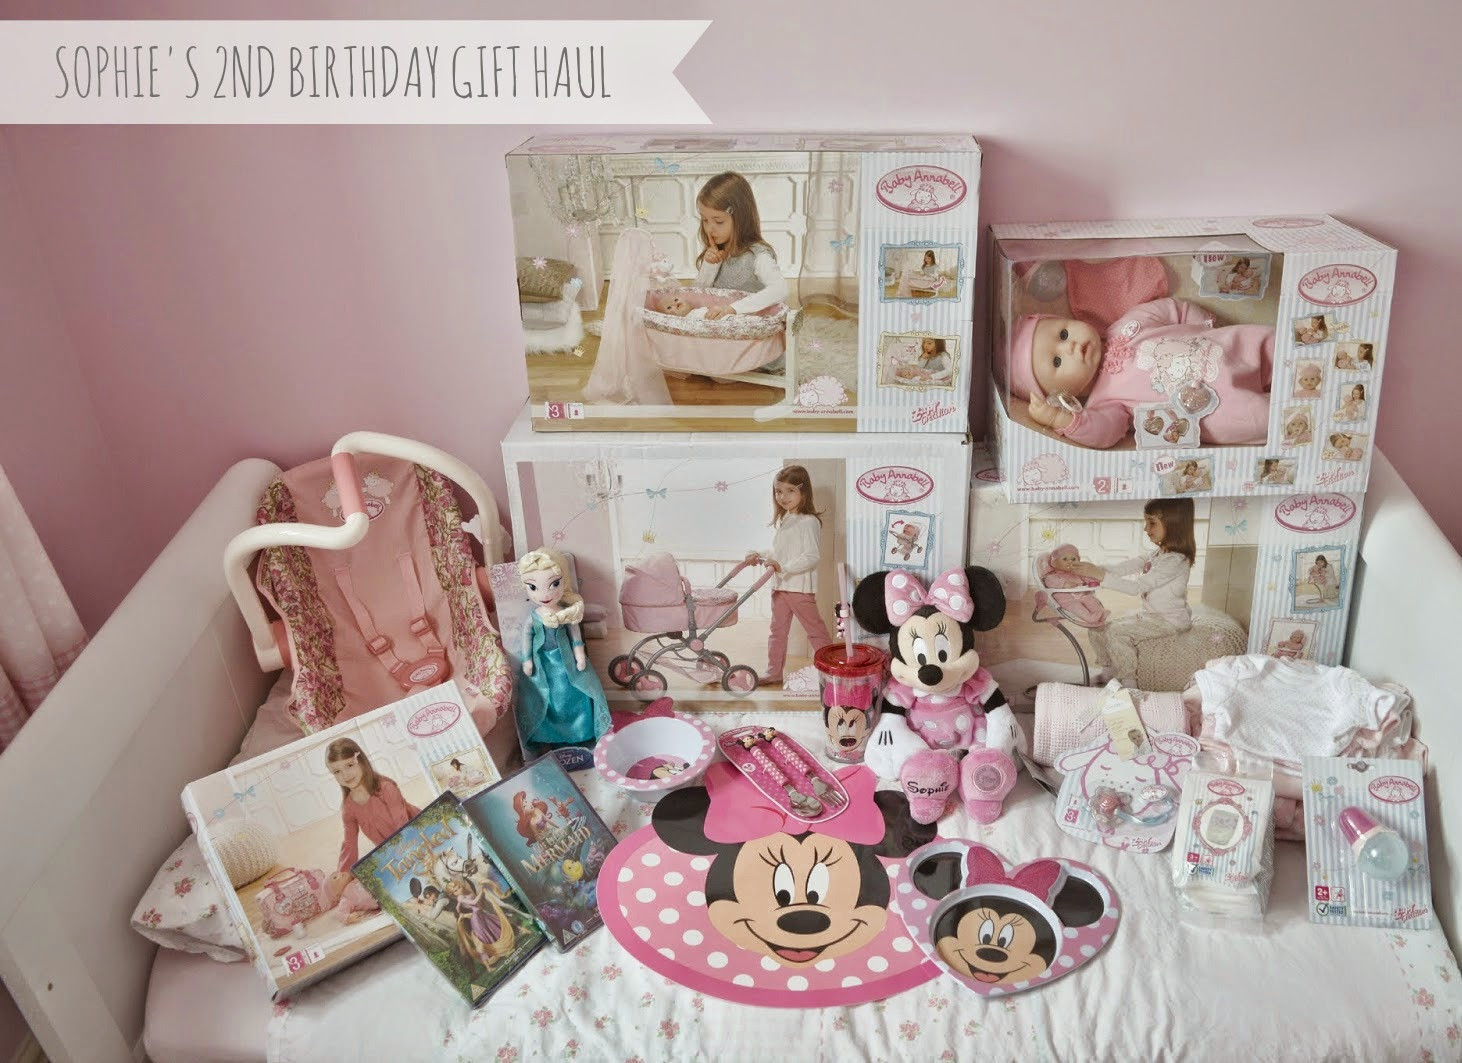 2Nd Birthday Gift Ideas For Girl
 Sophie s 2nd Birthday Gift Haul